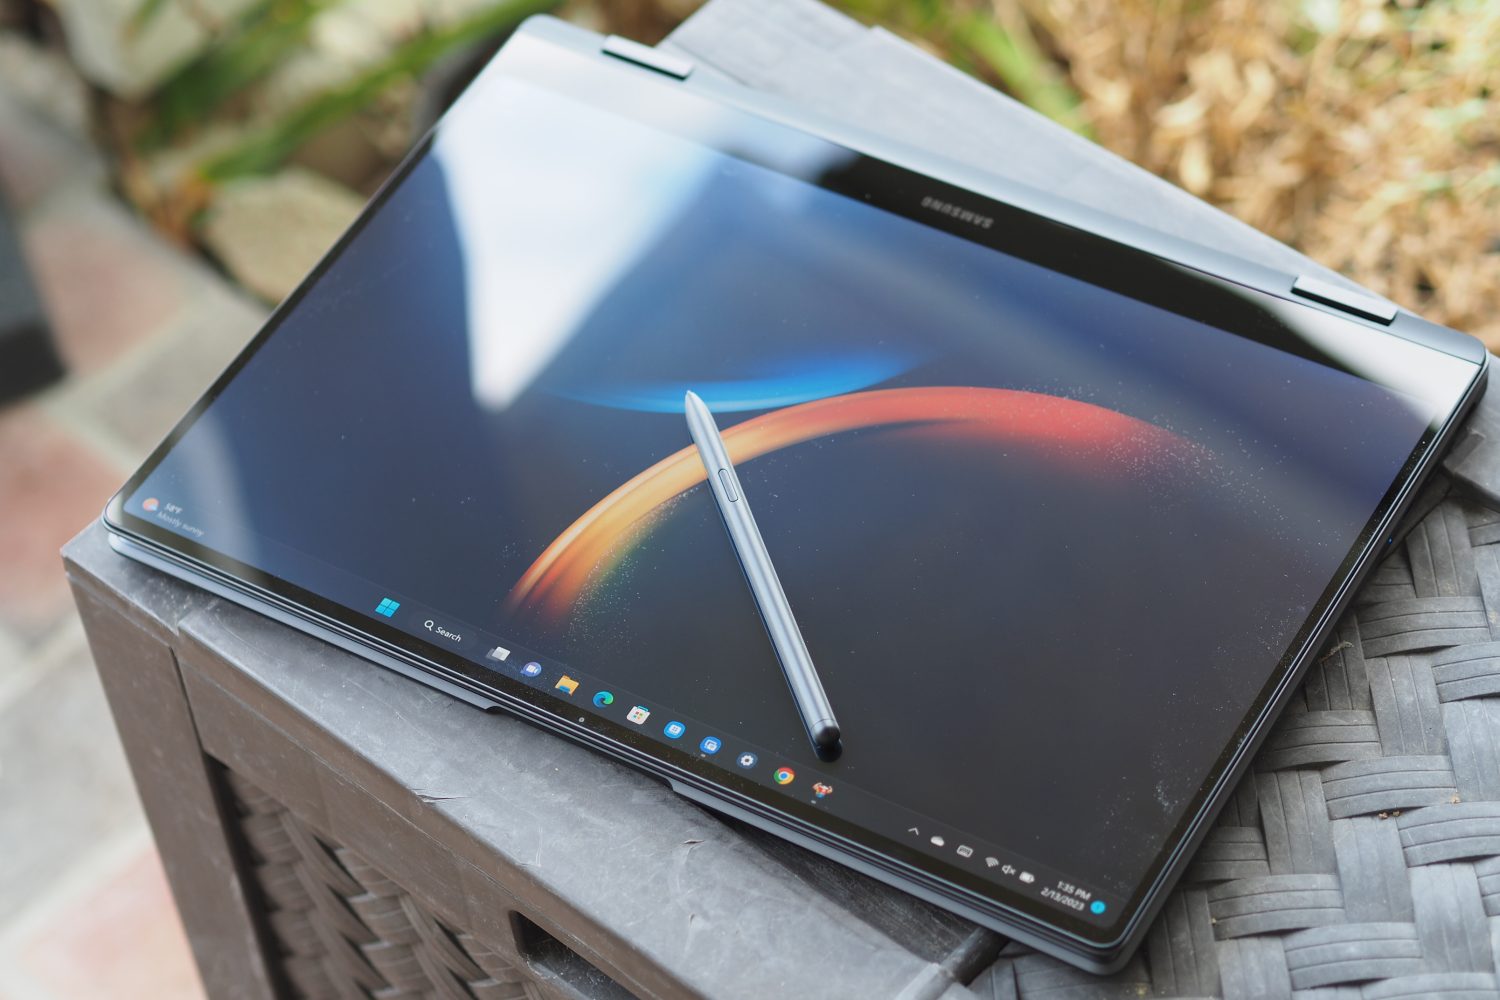 Samsung Galaxy Book 3 Pro 360 Review: Puts on an Impressive